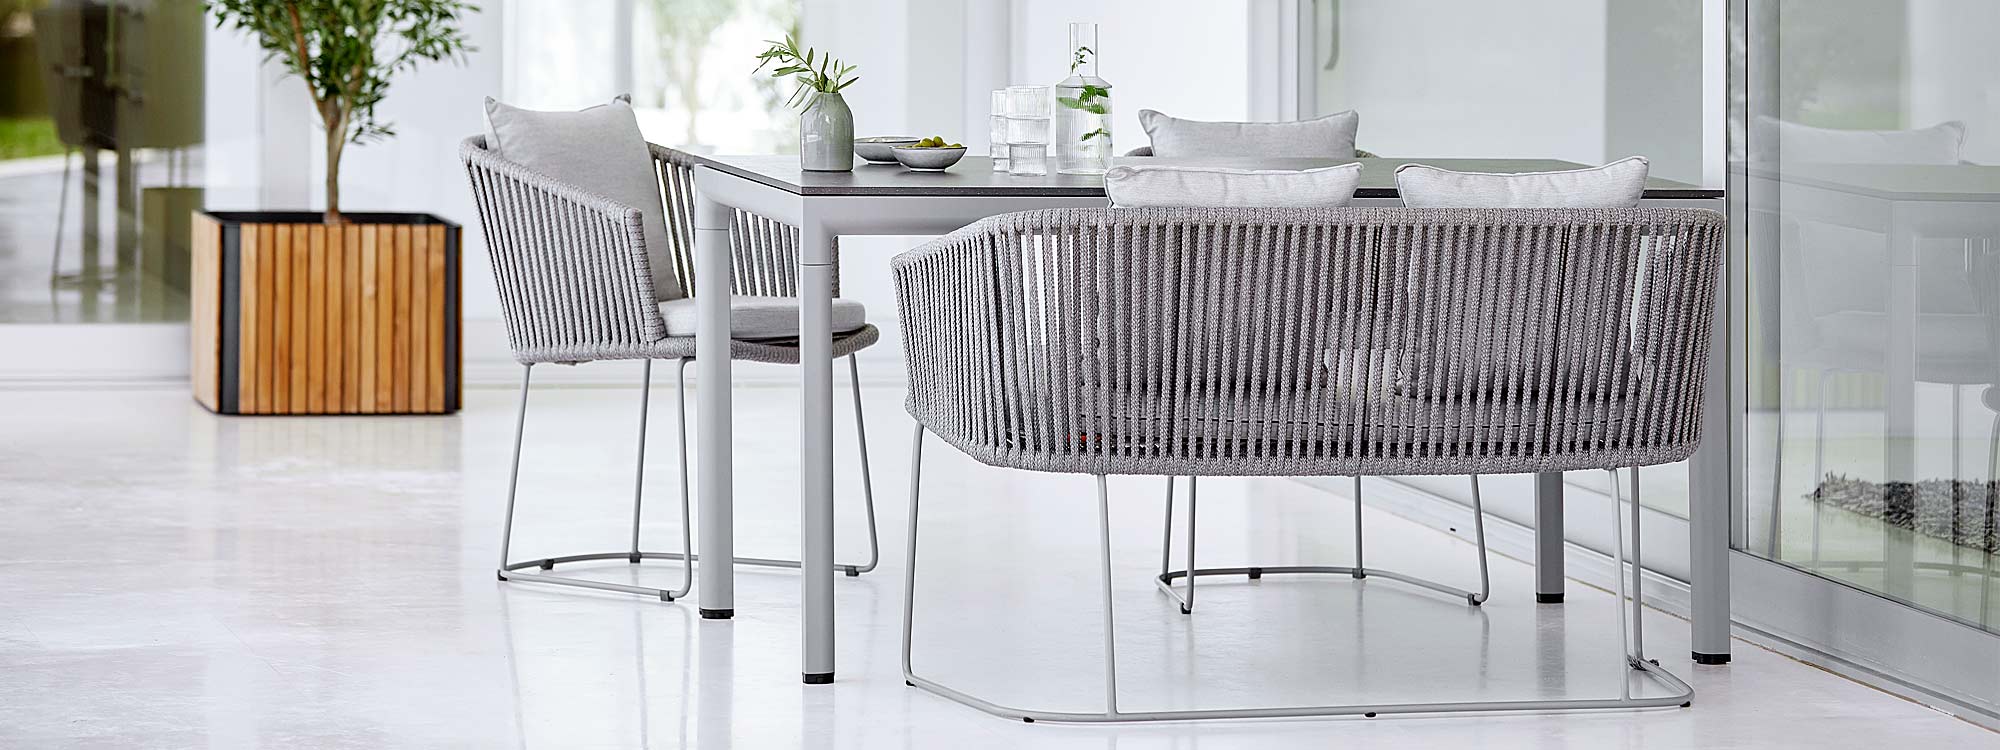 Image of light grey Drop garden dining table and light grey Soft Rope Moments dining chairs and dining bench by Cane-line